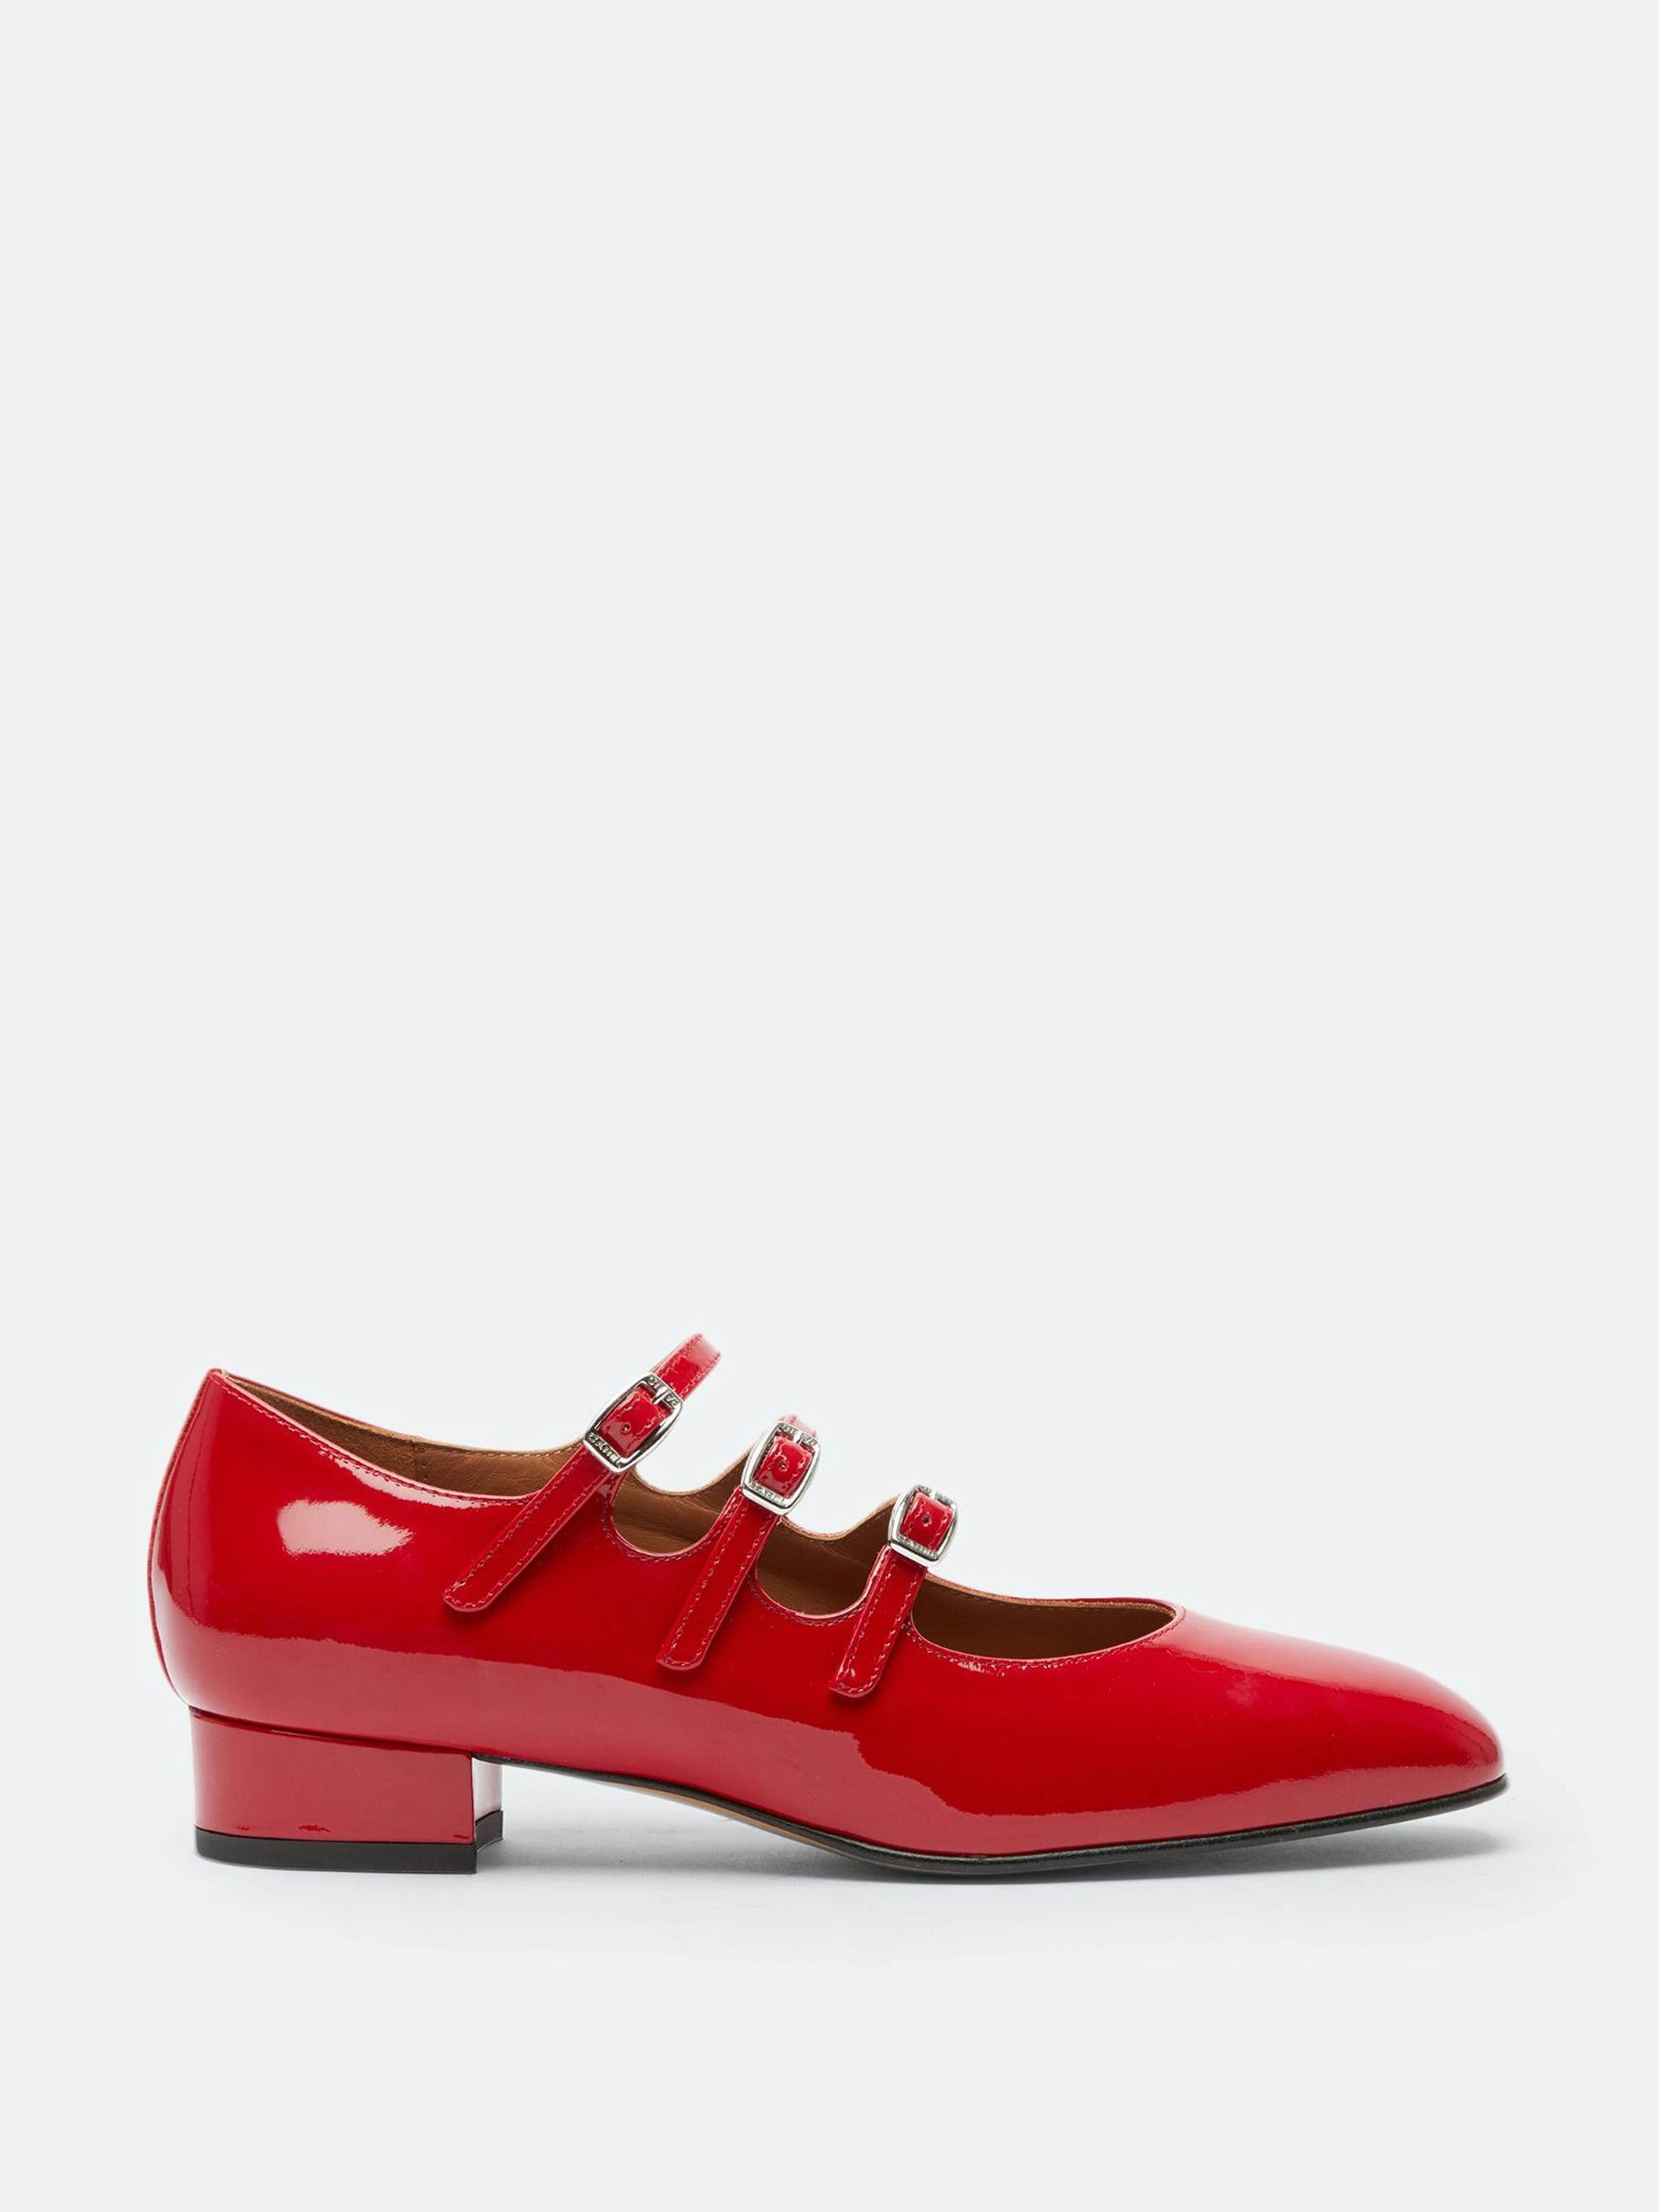 Kina patent leather Mary Janes